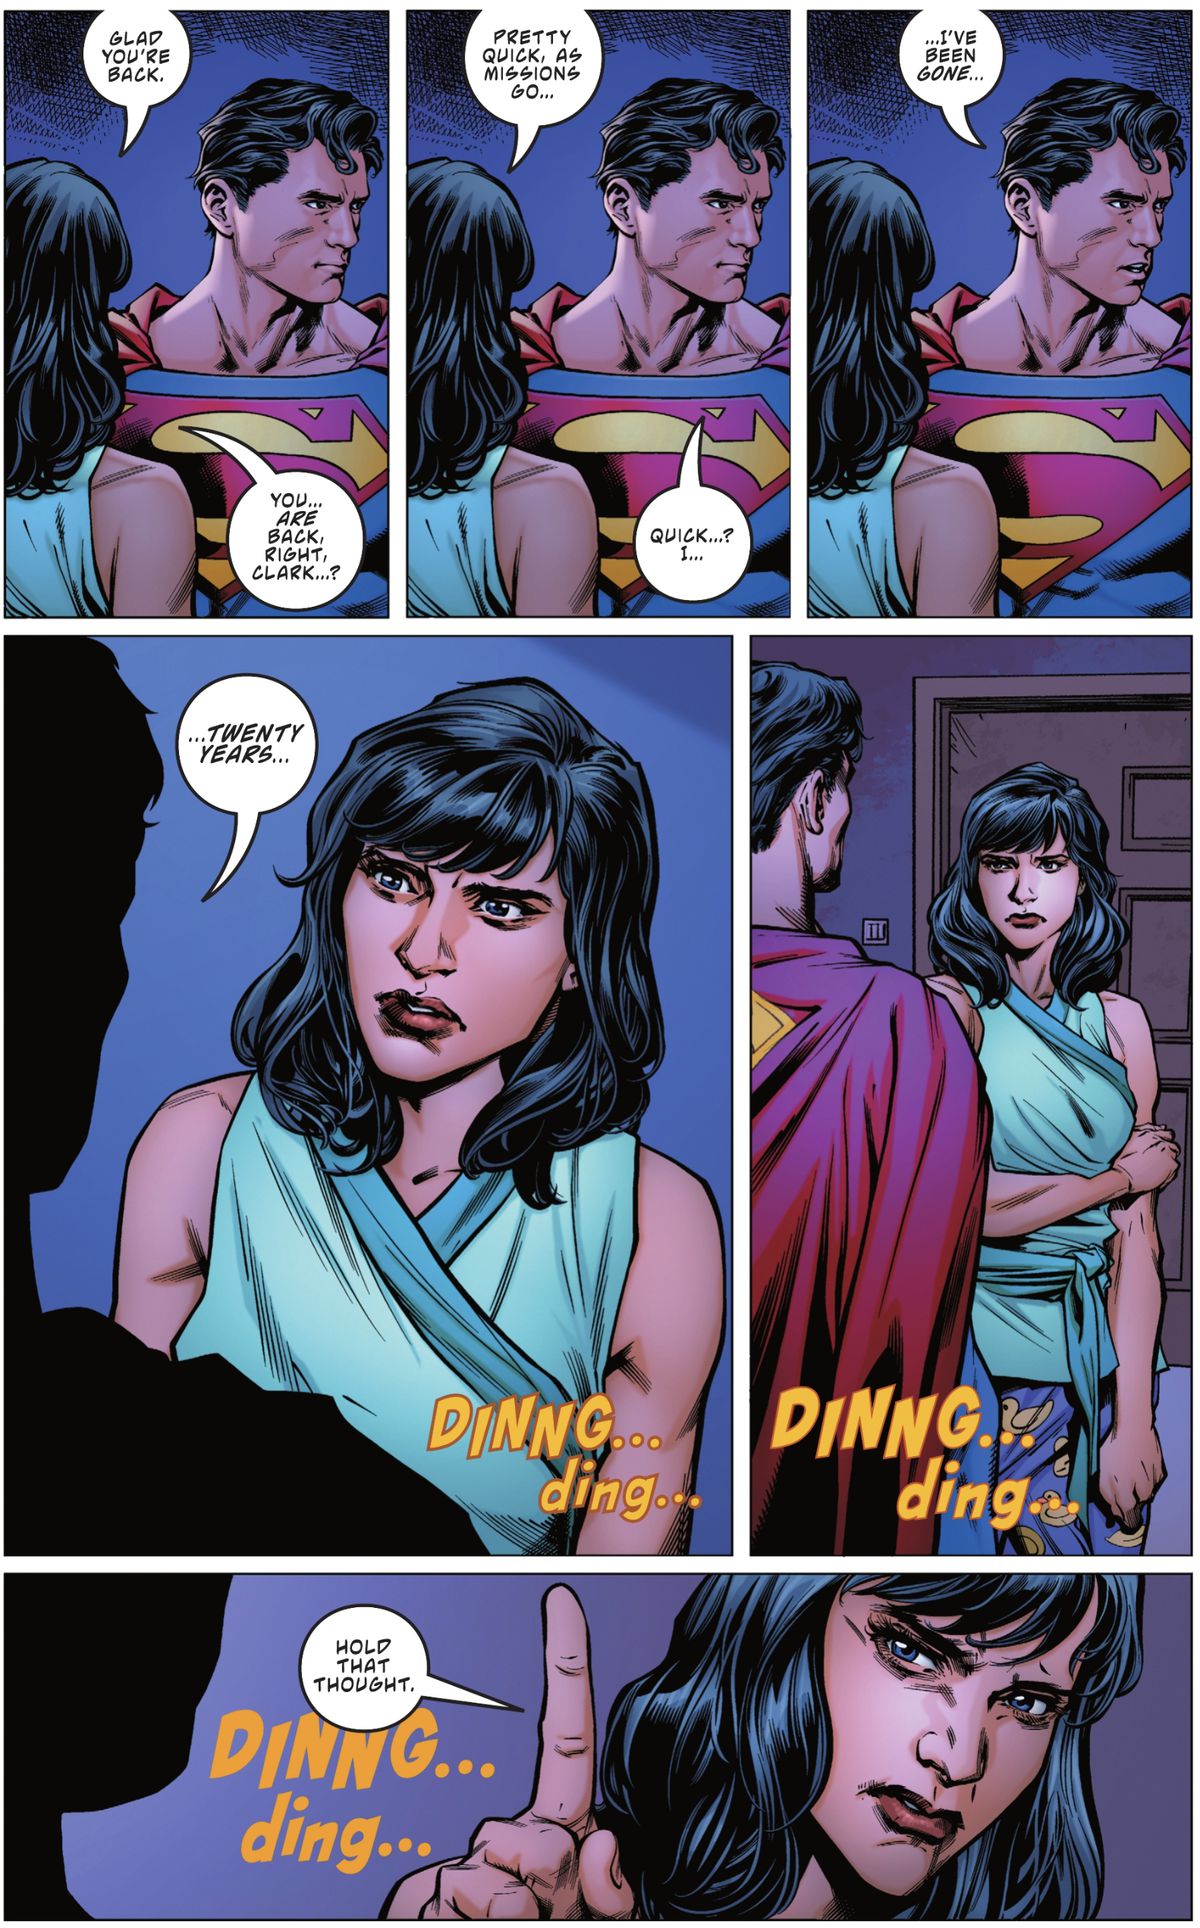 “You’re back,” Lois Lane says to a shocked Superman, standing stock still in their apartment. “Pretty quick as missions go.” After a long silence, he finally says “Quick? I... I’ve been gone twenty years.” Then the doorbell rings, in Superman: Lost #1 (2023).